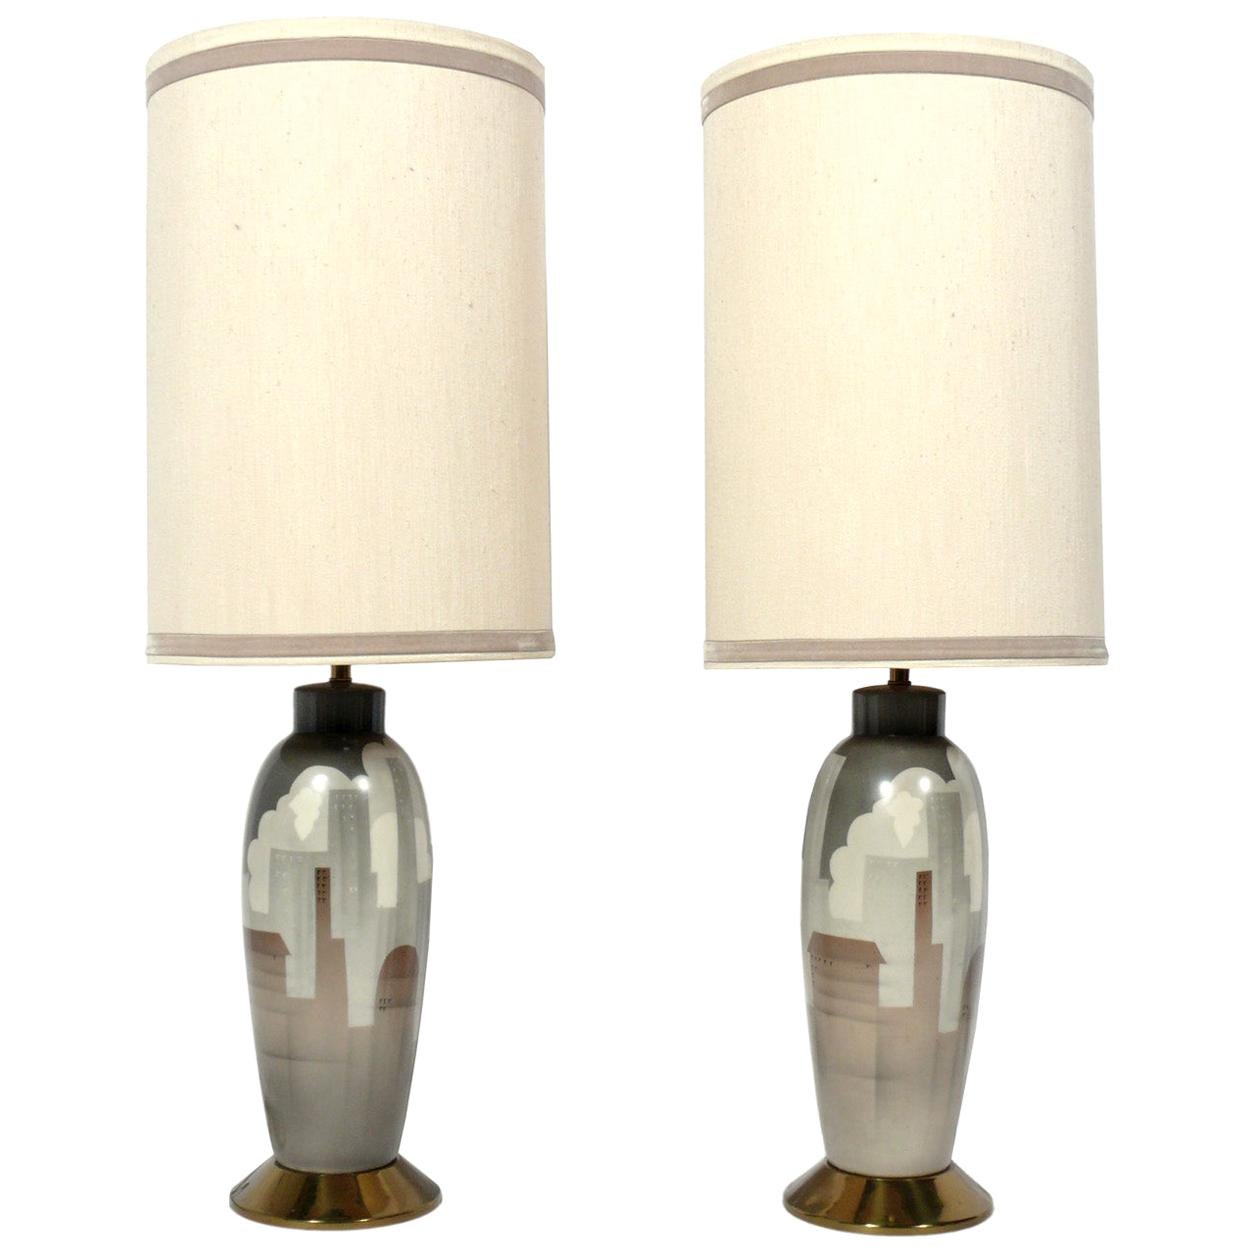 NYC Cityscape Pottery Lamps, circa 1940s For Sale